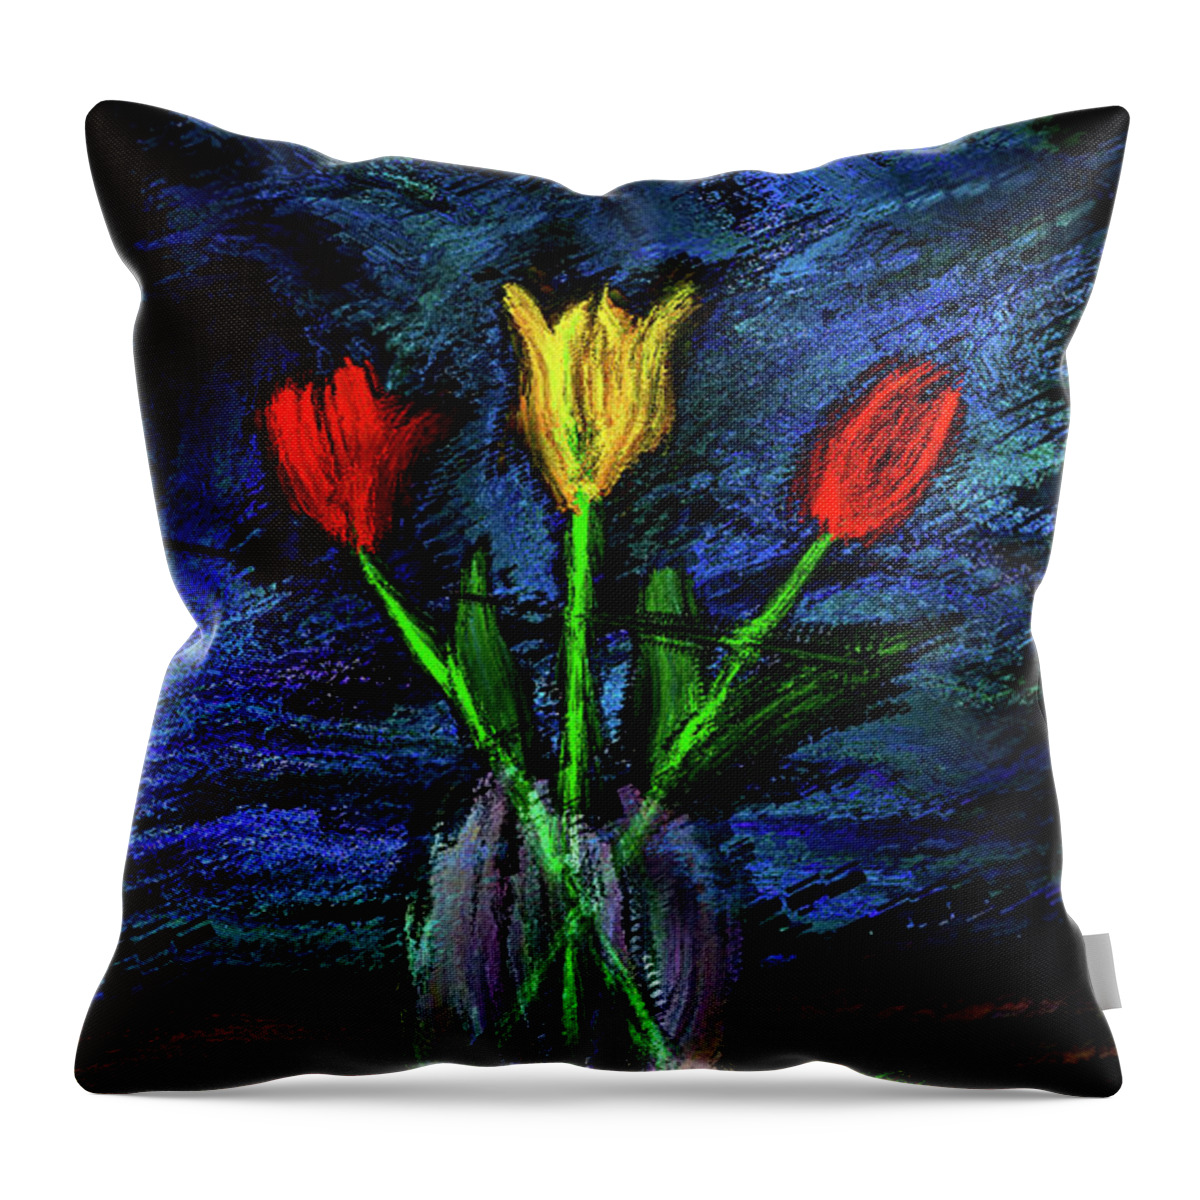 Eastern Tulips Throw Pillow featuring the digital art Eastern tulips #k8 by Leif Sohlman